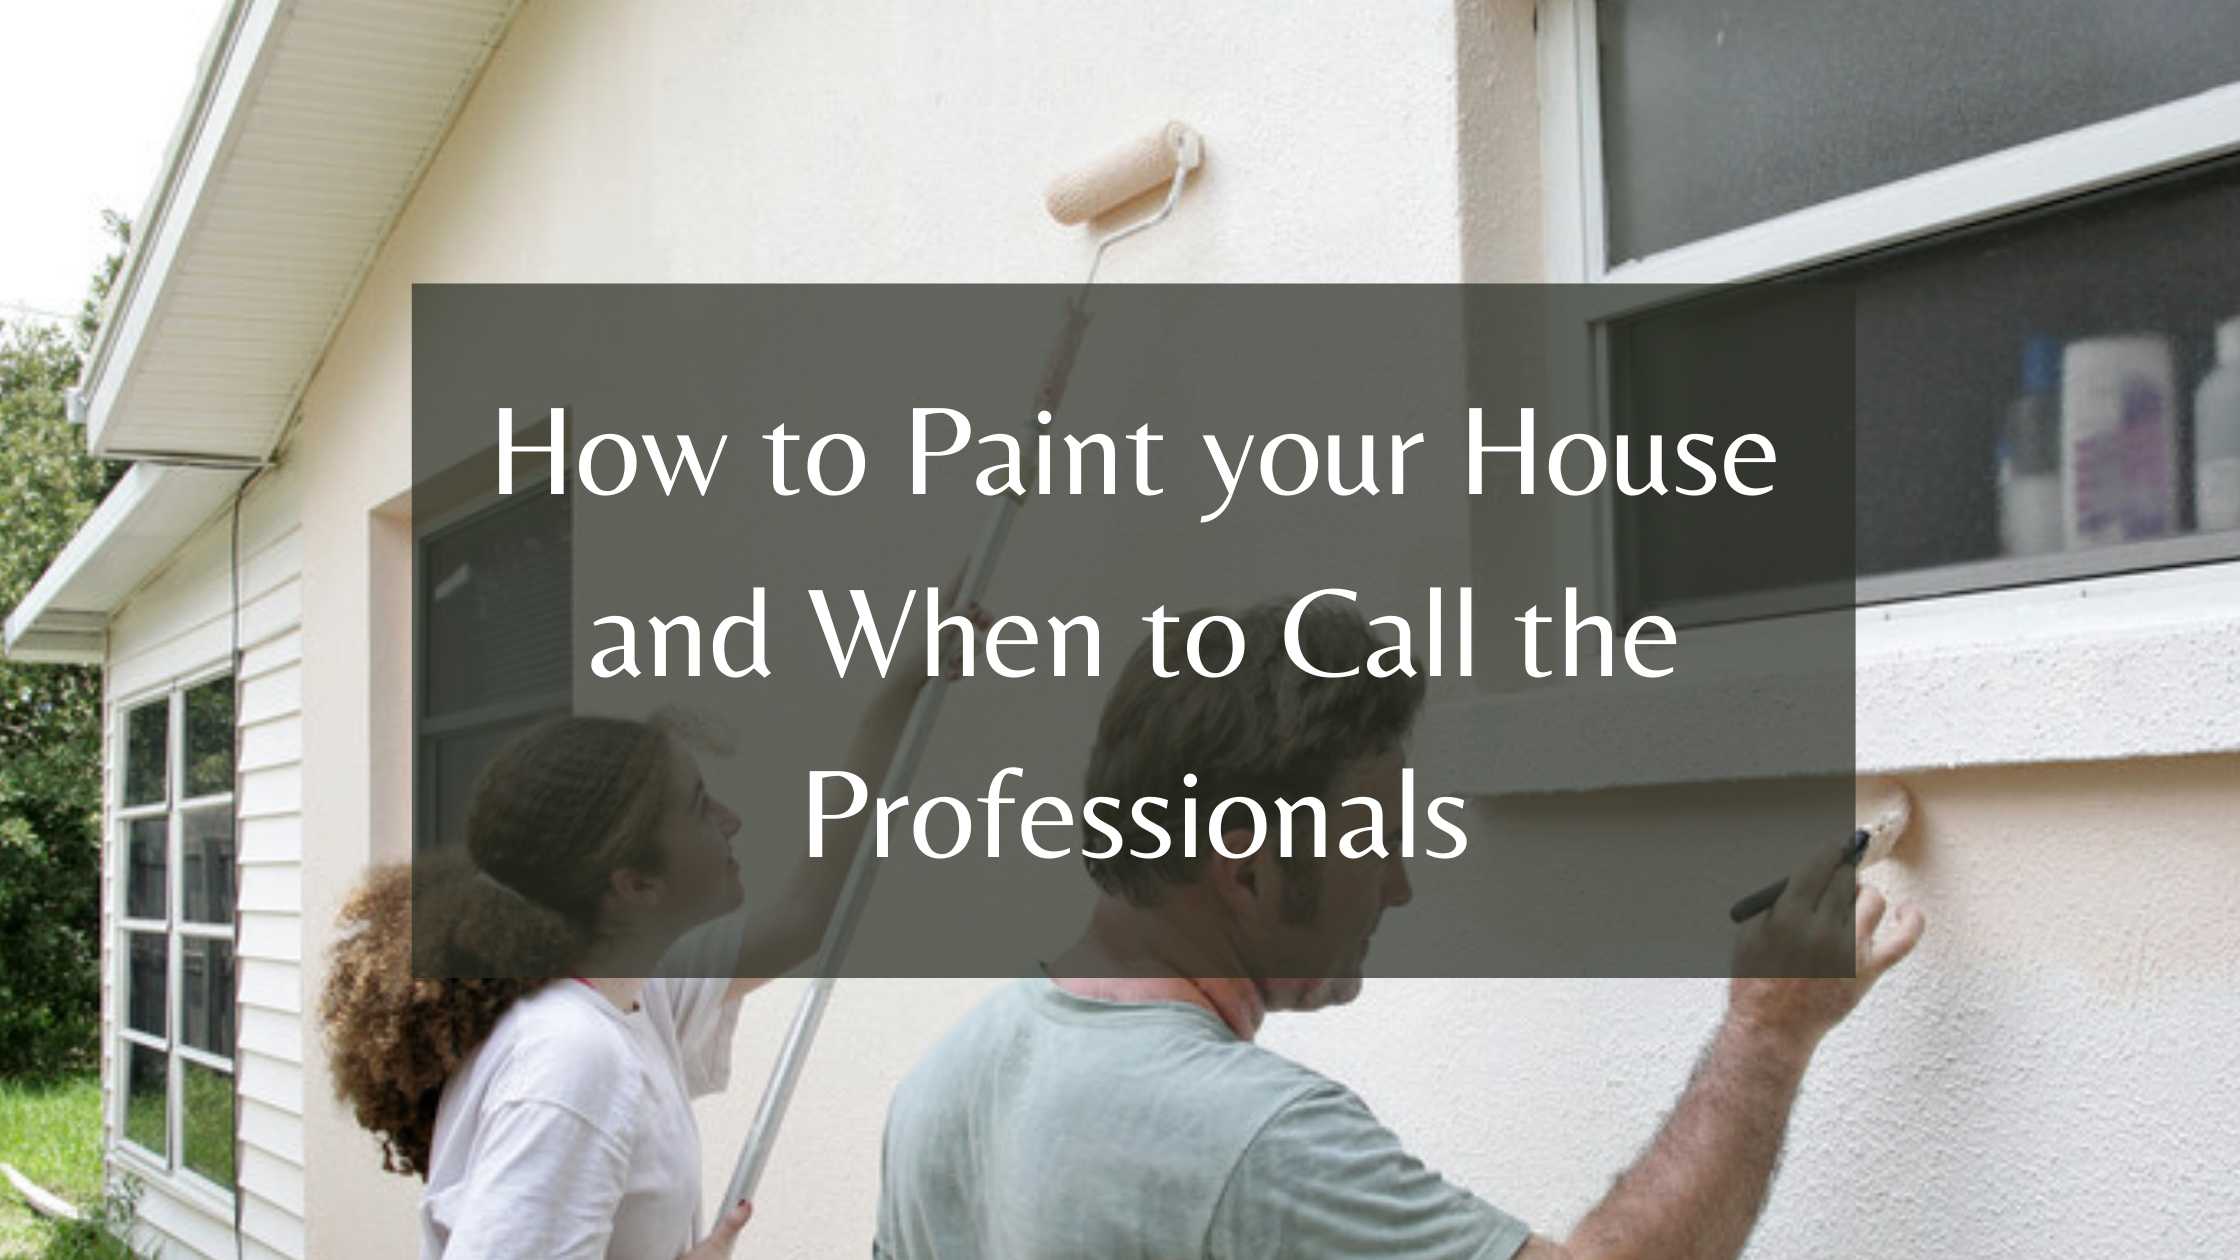 https://handymanconnection.com/wp-content/uploads/2021/05/How-to-Paint-your-House-and-When-to-Call-the-Professionals.png